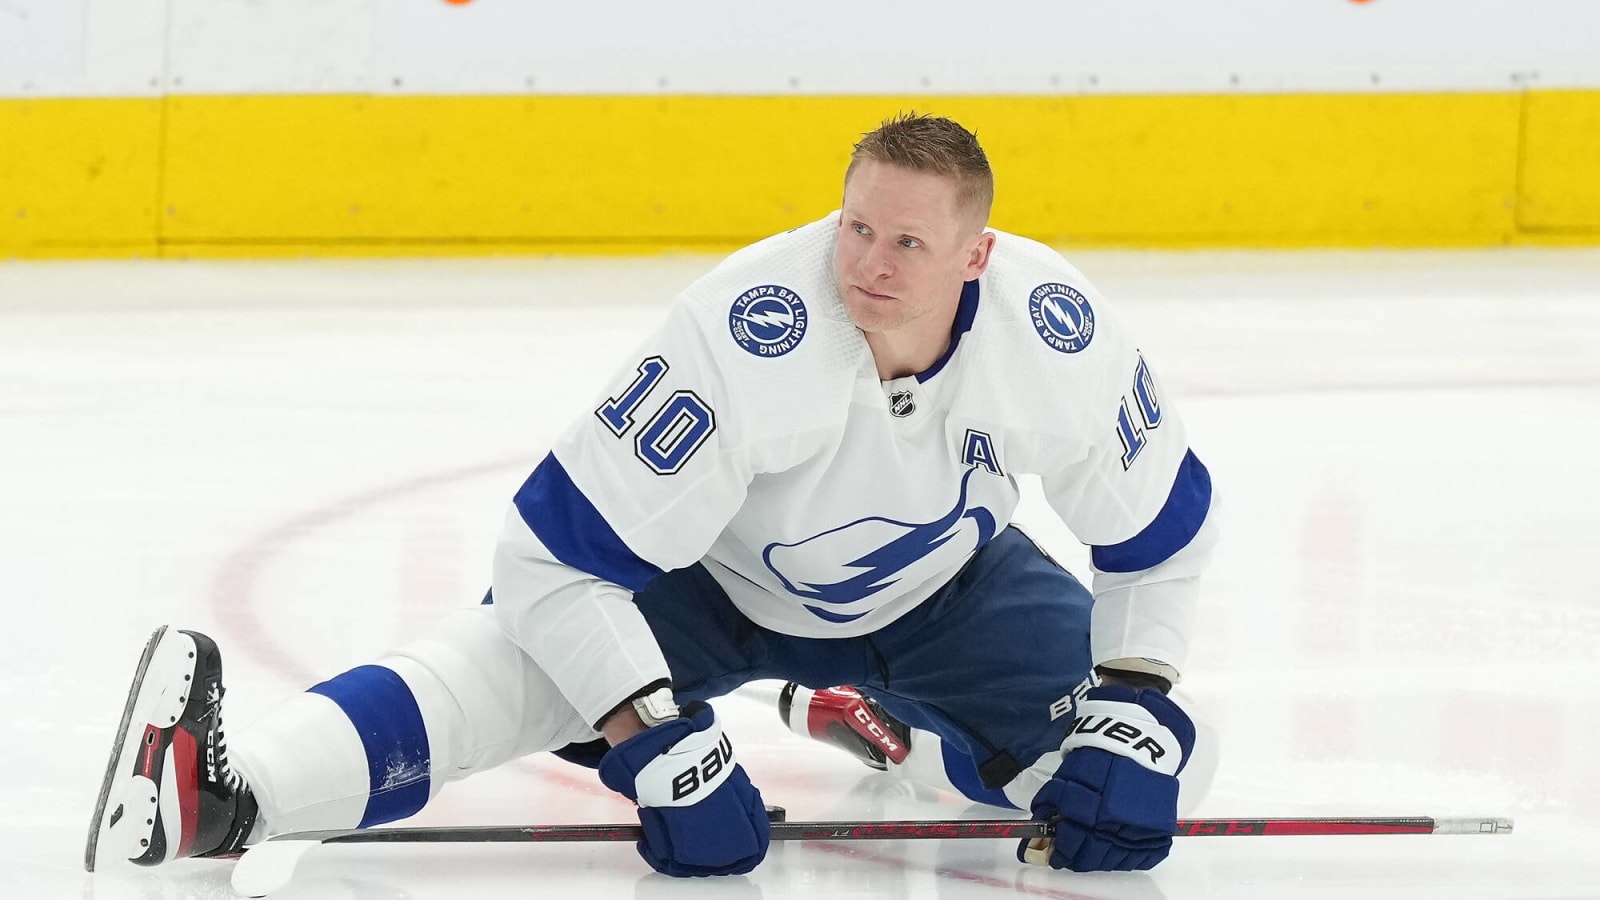 Blackhawks Acquire Forward Corey Perry from the Tampa Bay